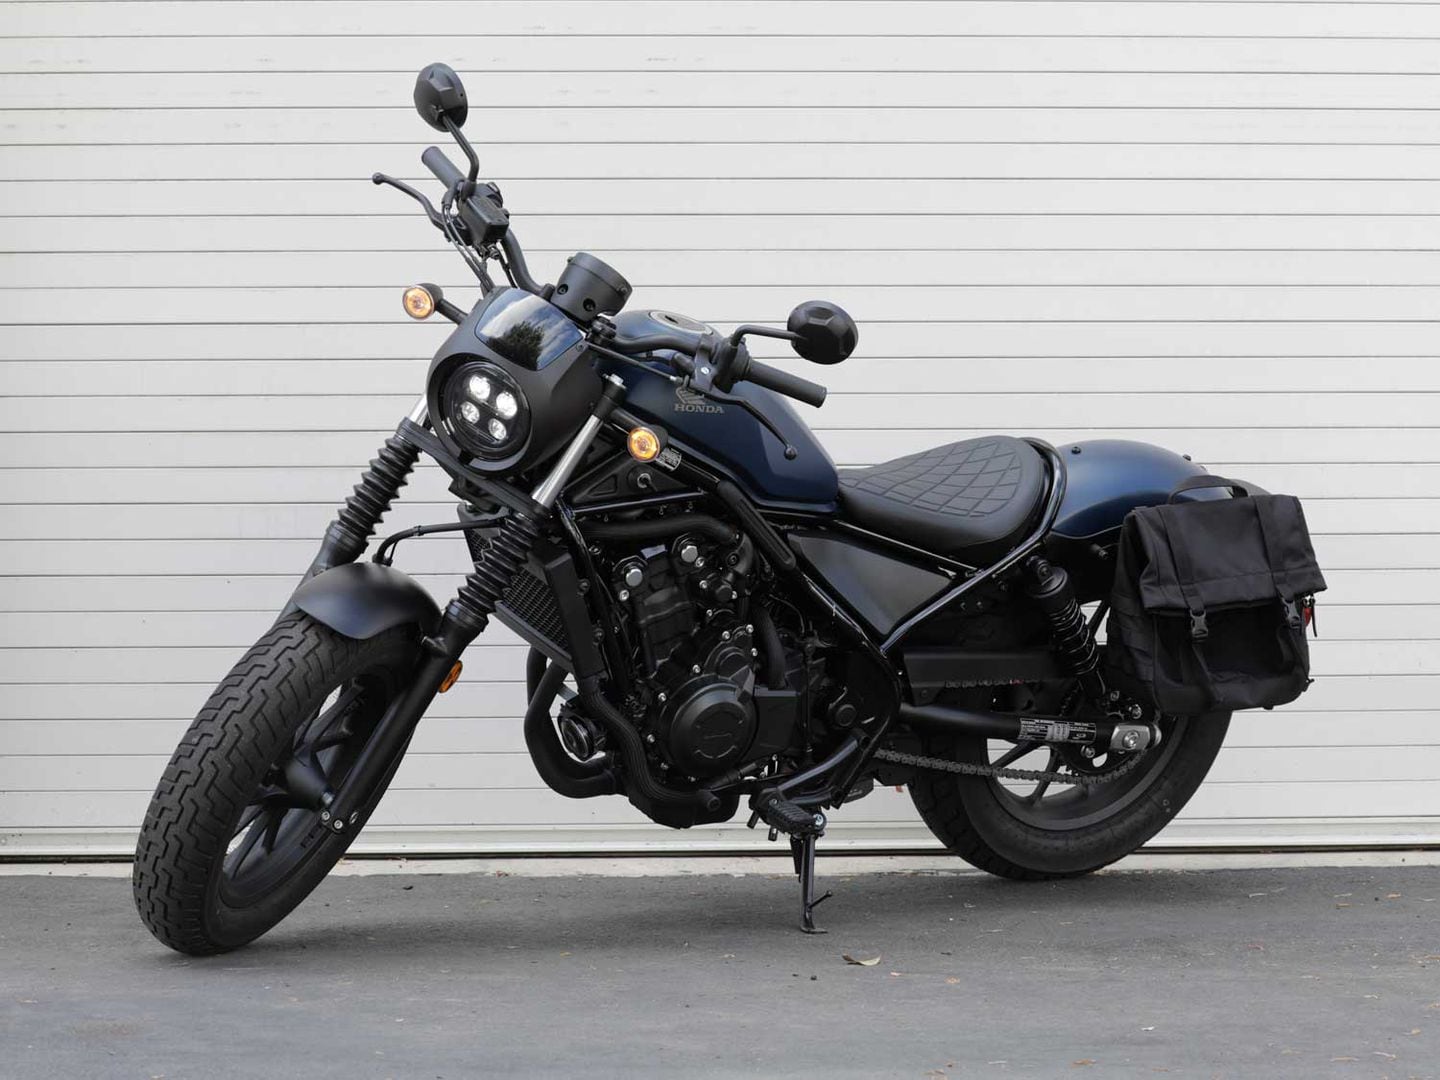 2021 Honda Rebel 500 Abs Review Latest Cars